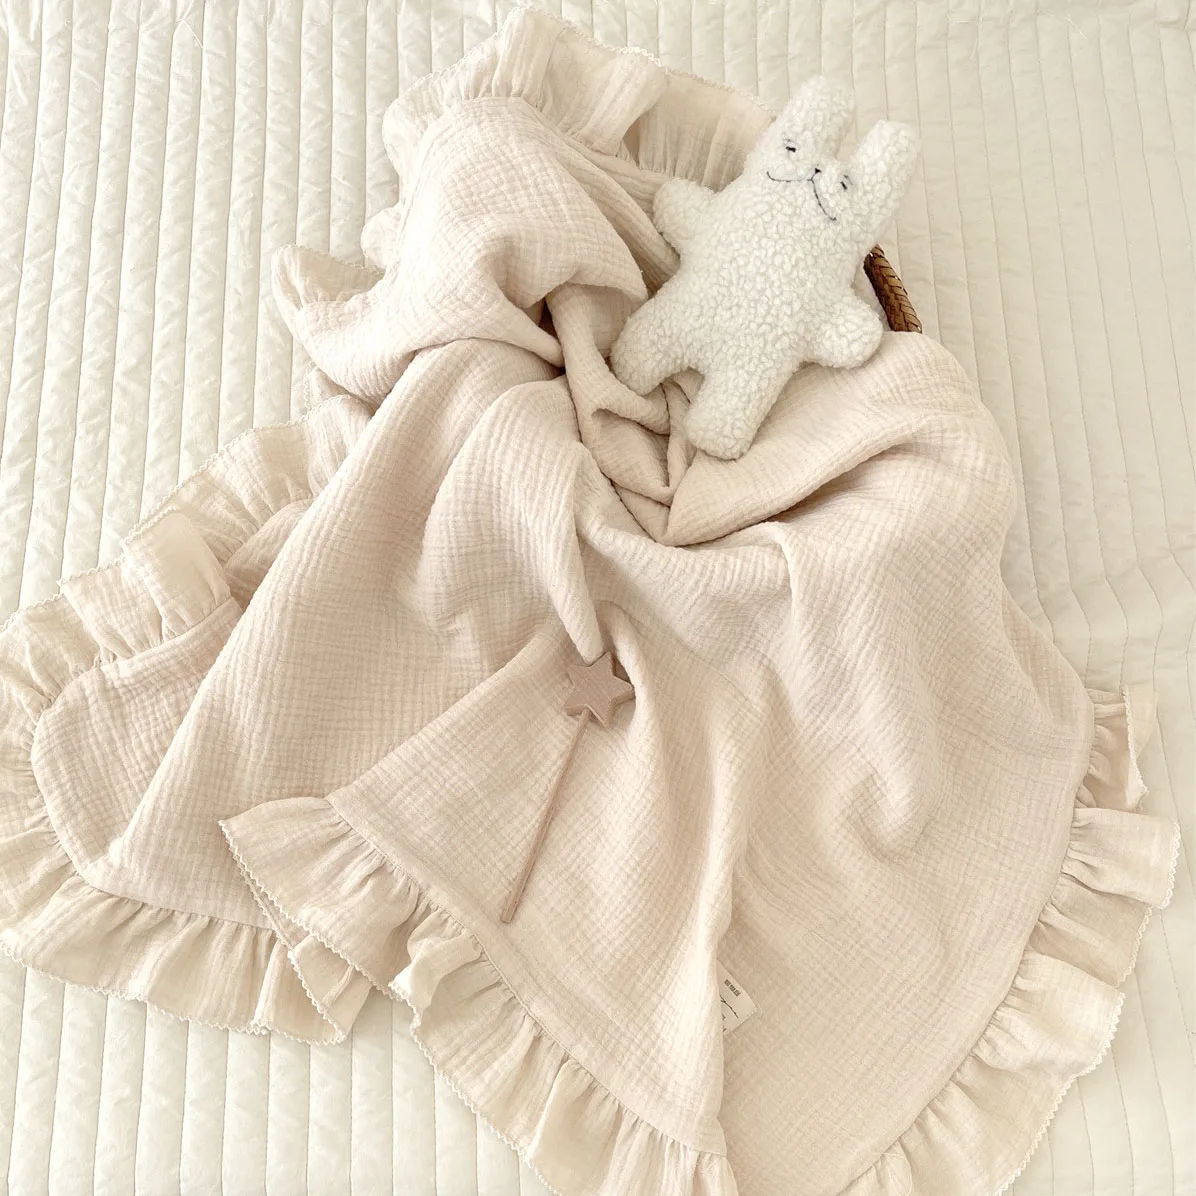 Muslin Baby Swaddle Blanket 4-Layered Cotton Muslin Baby Girls Receiving Blanket with Ruffle Edge Skin-Friendly Baby Wrap